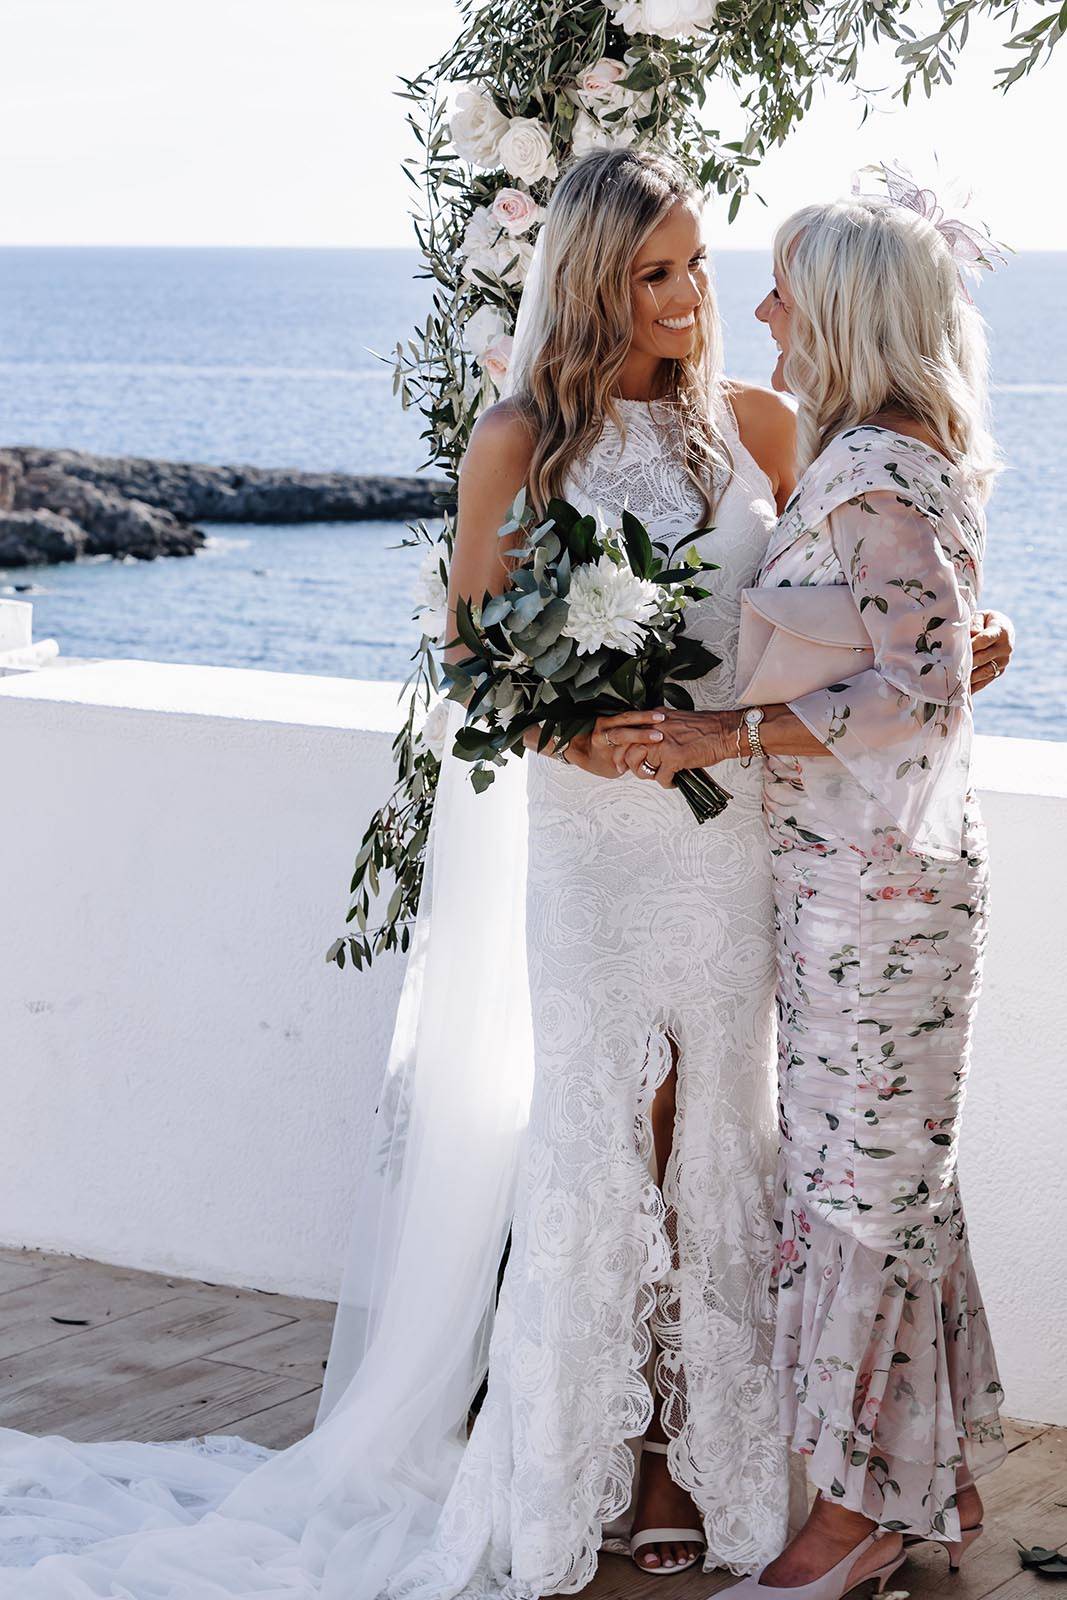 Bride, sharing a joyous moment with her mother